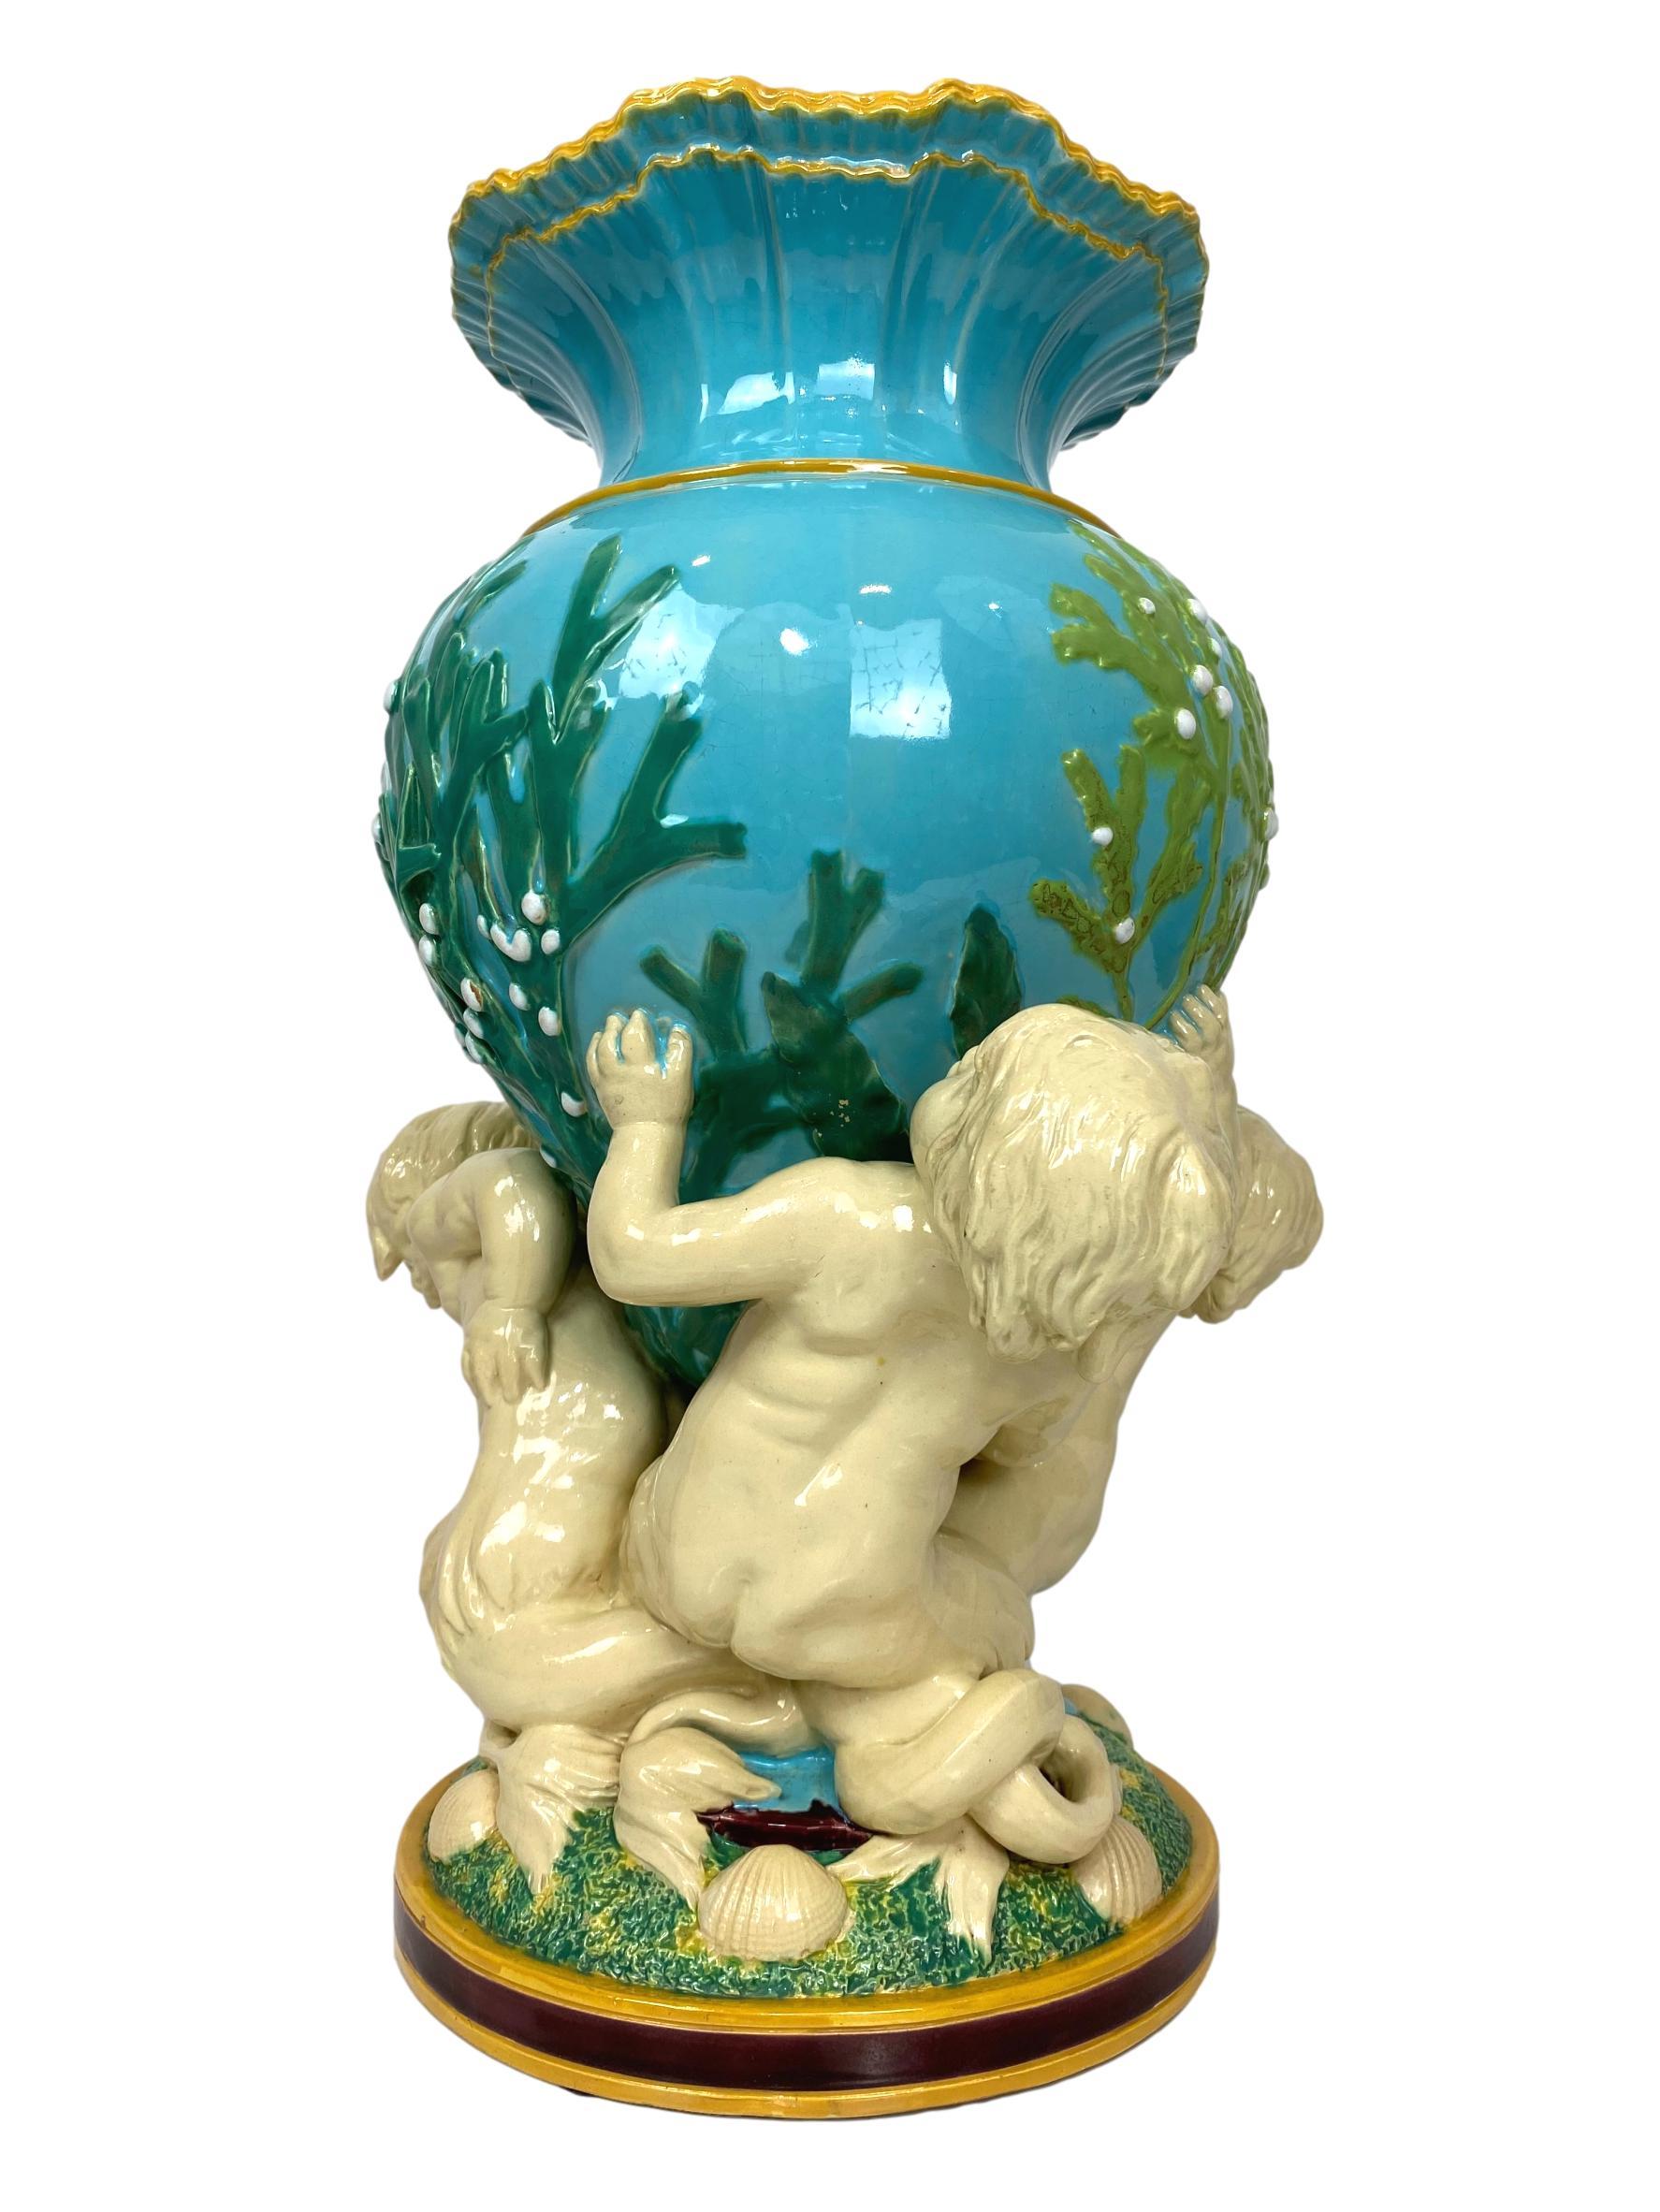 Molded Minton Majolica Triton Marine Vase in Green, Turquoise, and Pink, ca. 1855